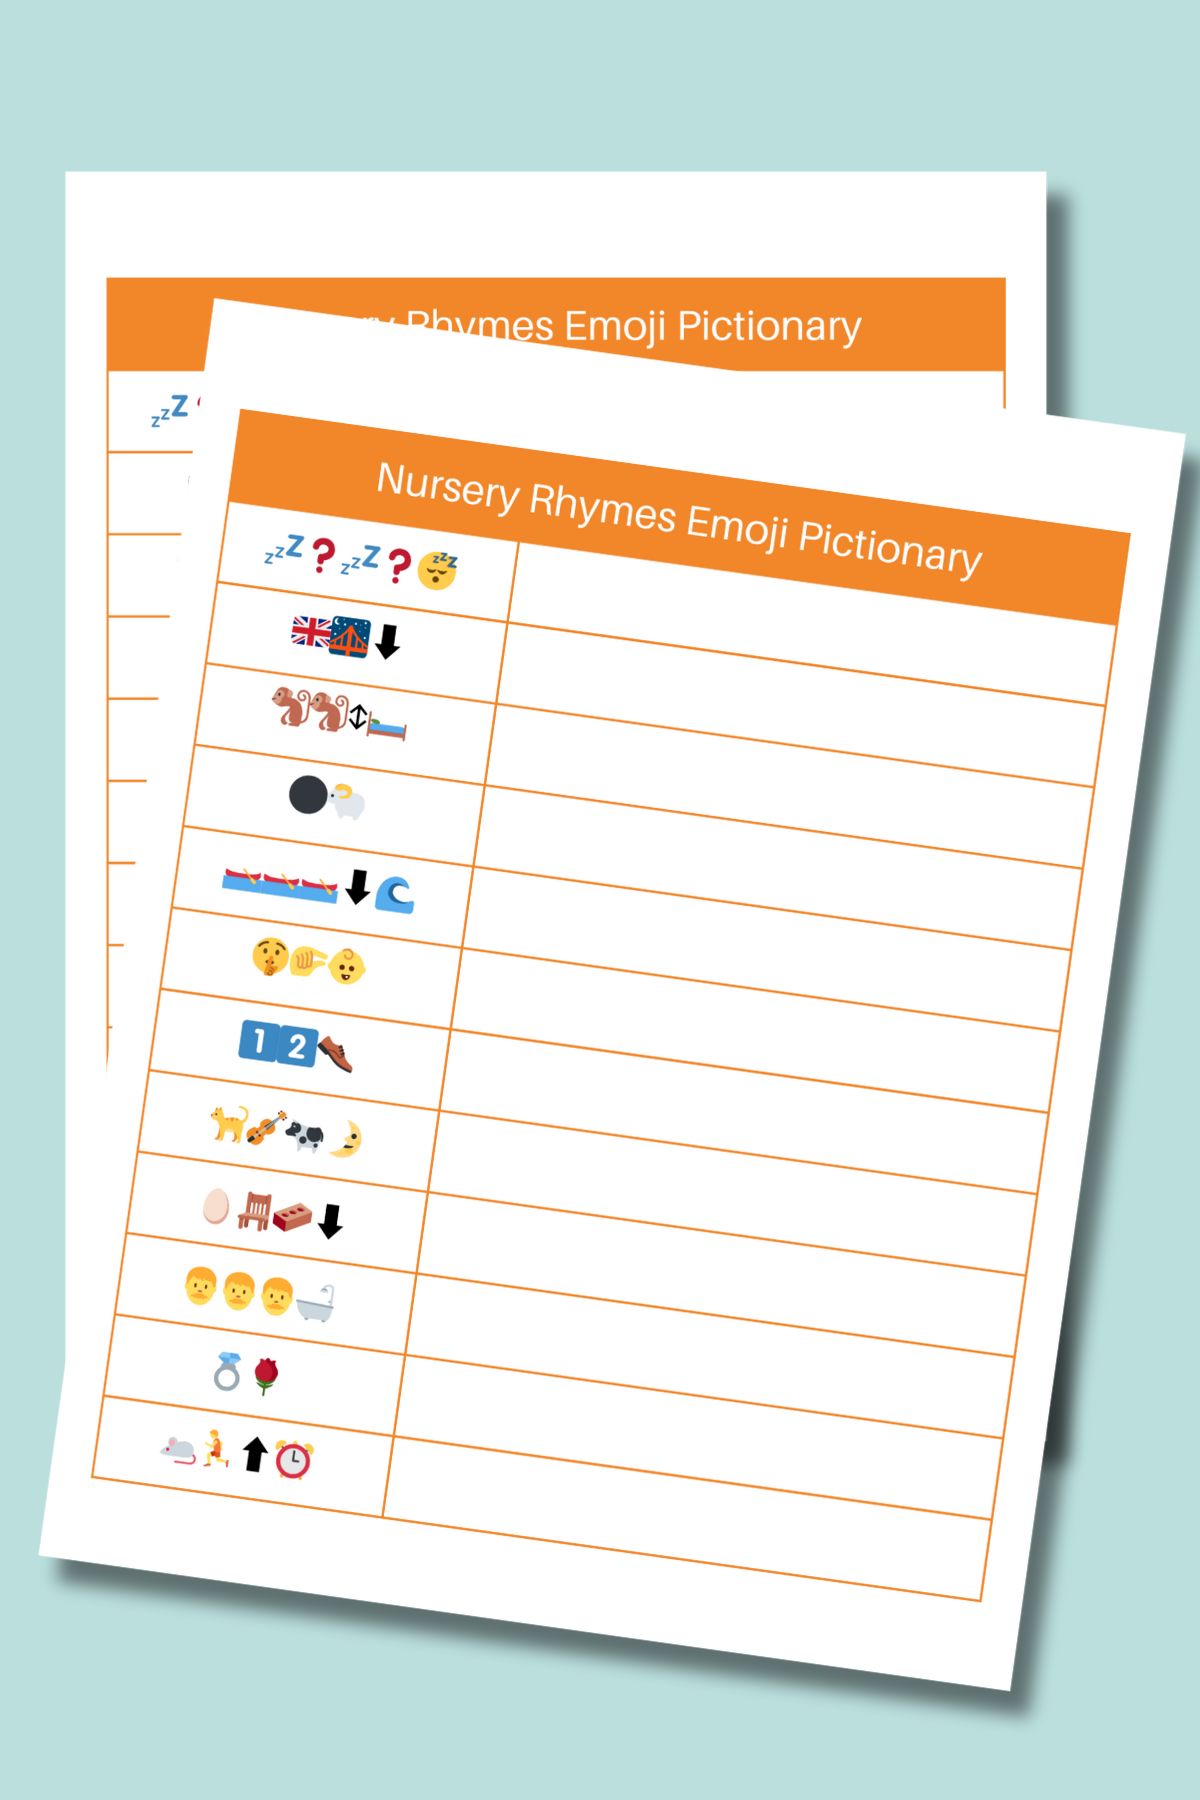 Nursery Rhymes Emojis Pictionary printables on a blue background.